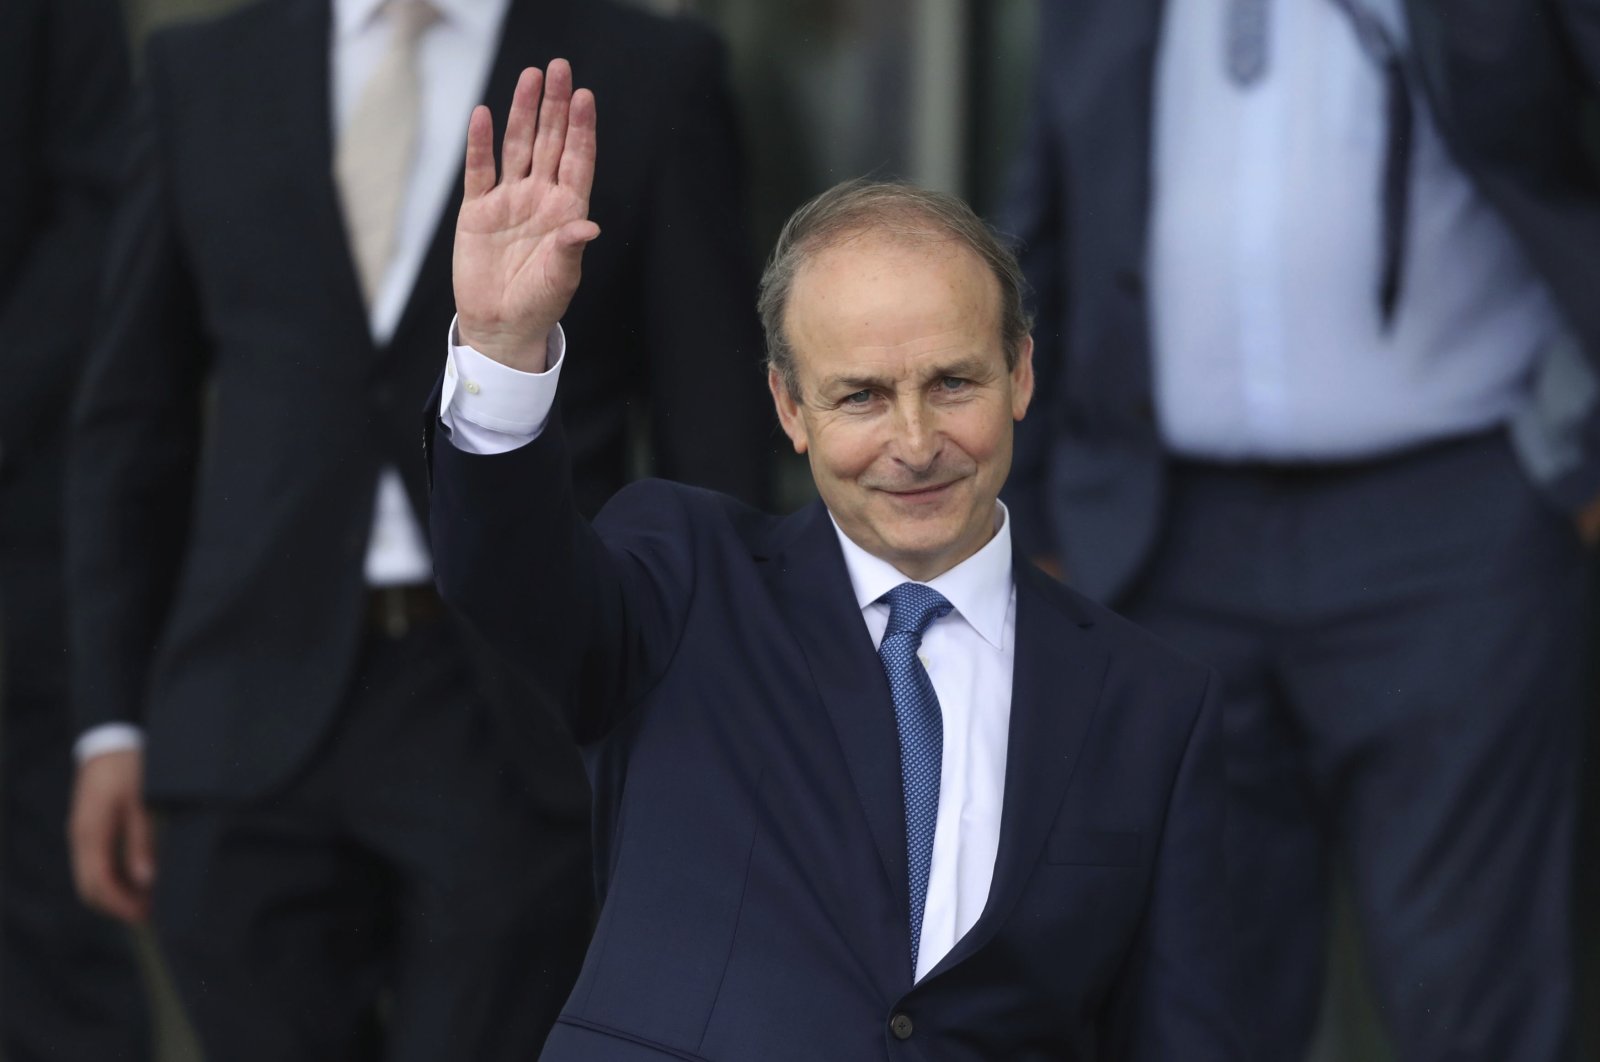 Fianna Fail party leader Micheal Martin leaves the Dail government in Dublin, where he has been officially elected as the new Irish Premier, June 27, 2020. (AP Photo)